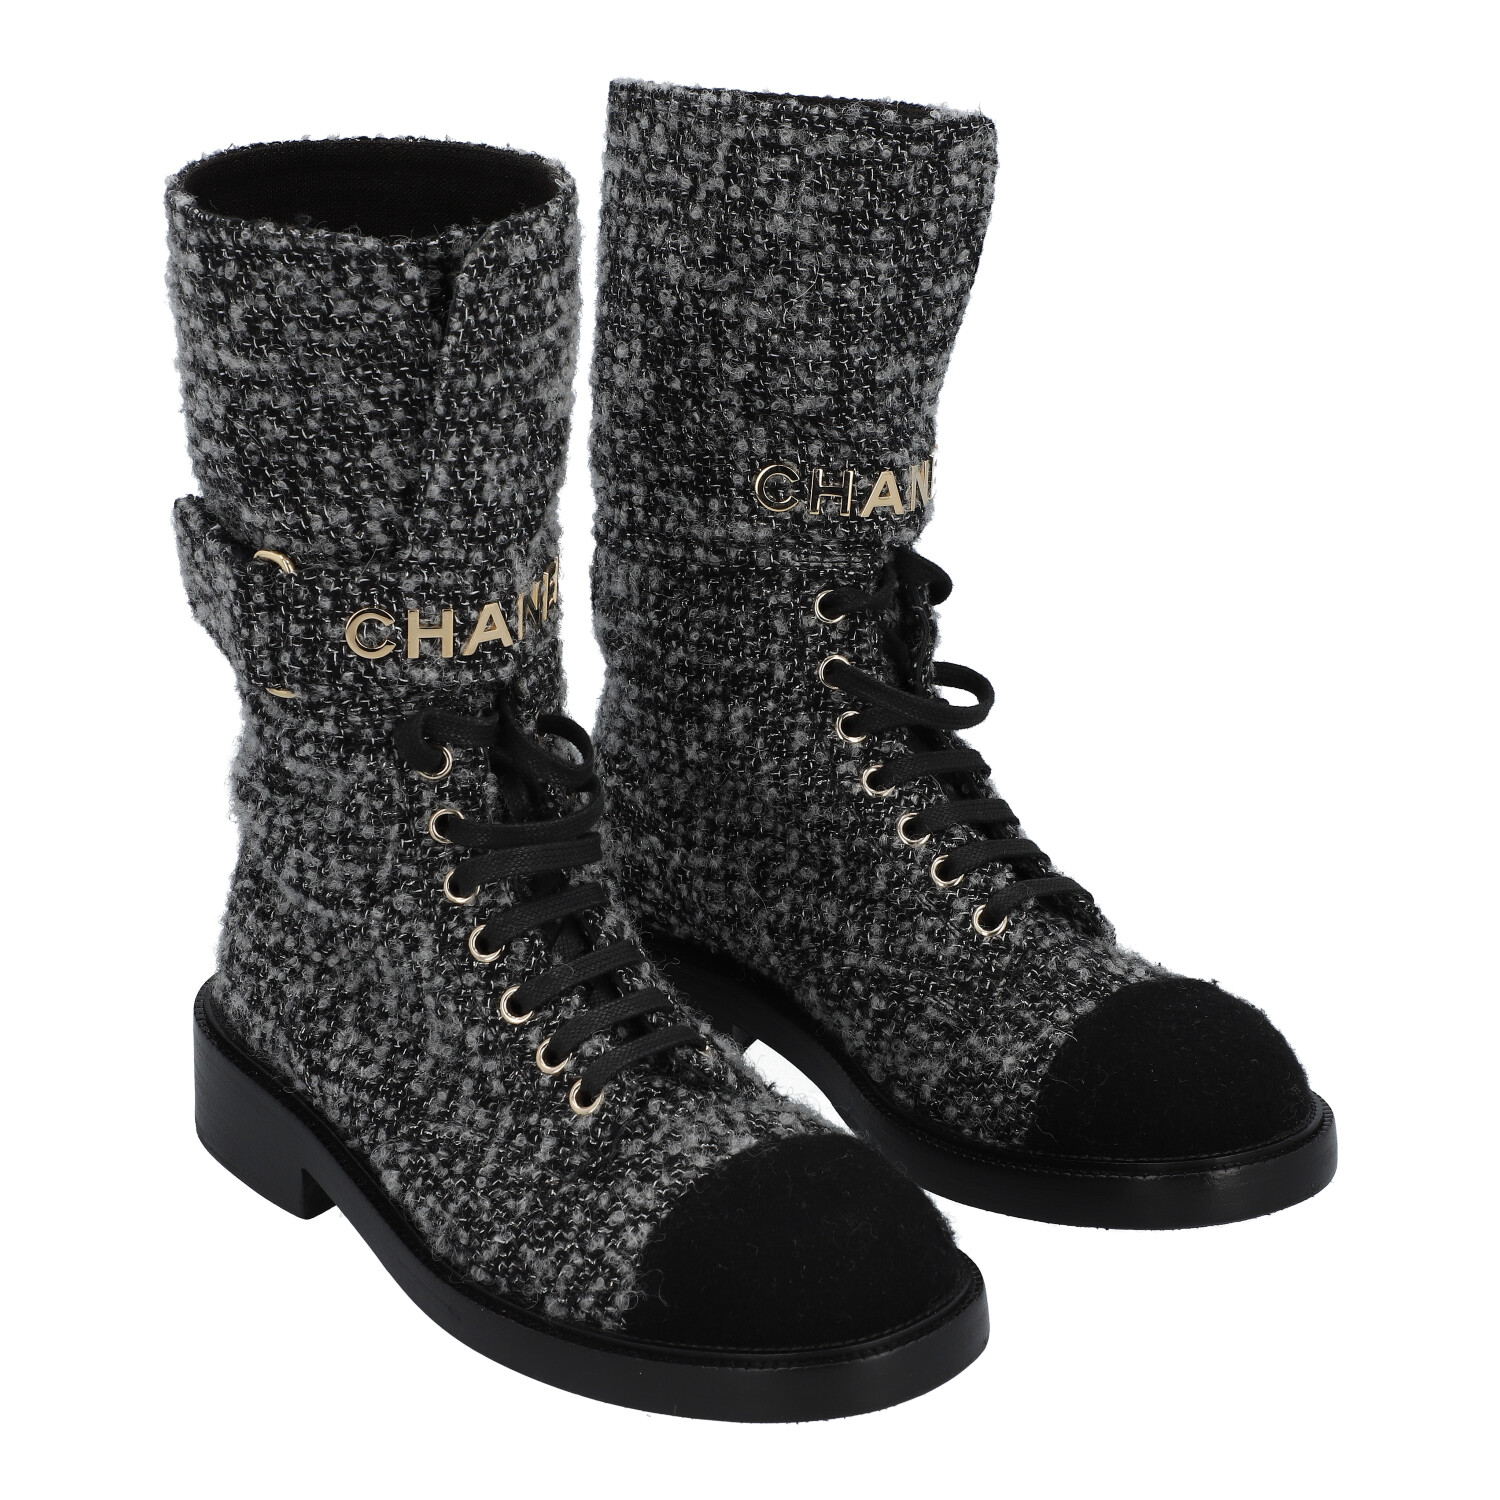 CHANEL CRUISE 2022/23 COLLECTION - CHANEL BOOTS 